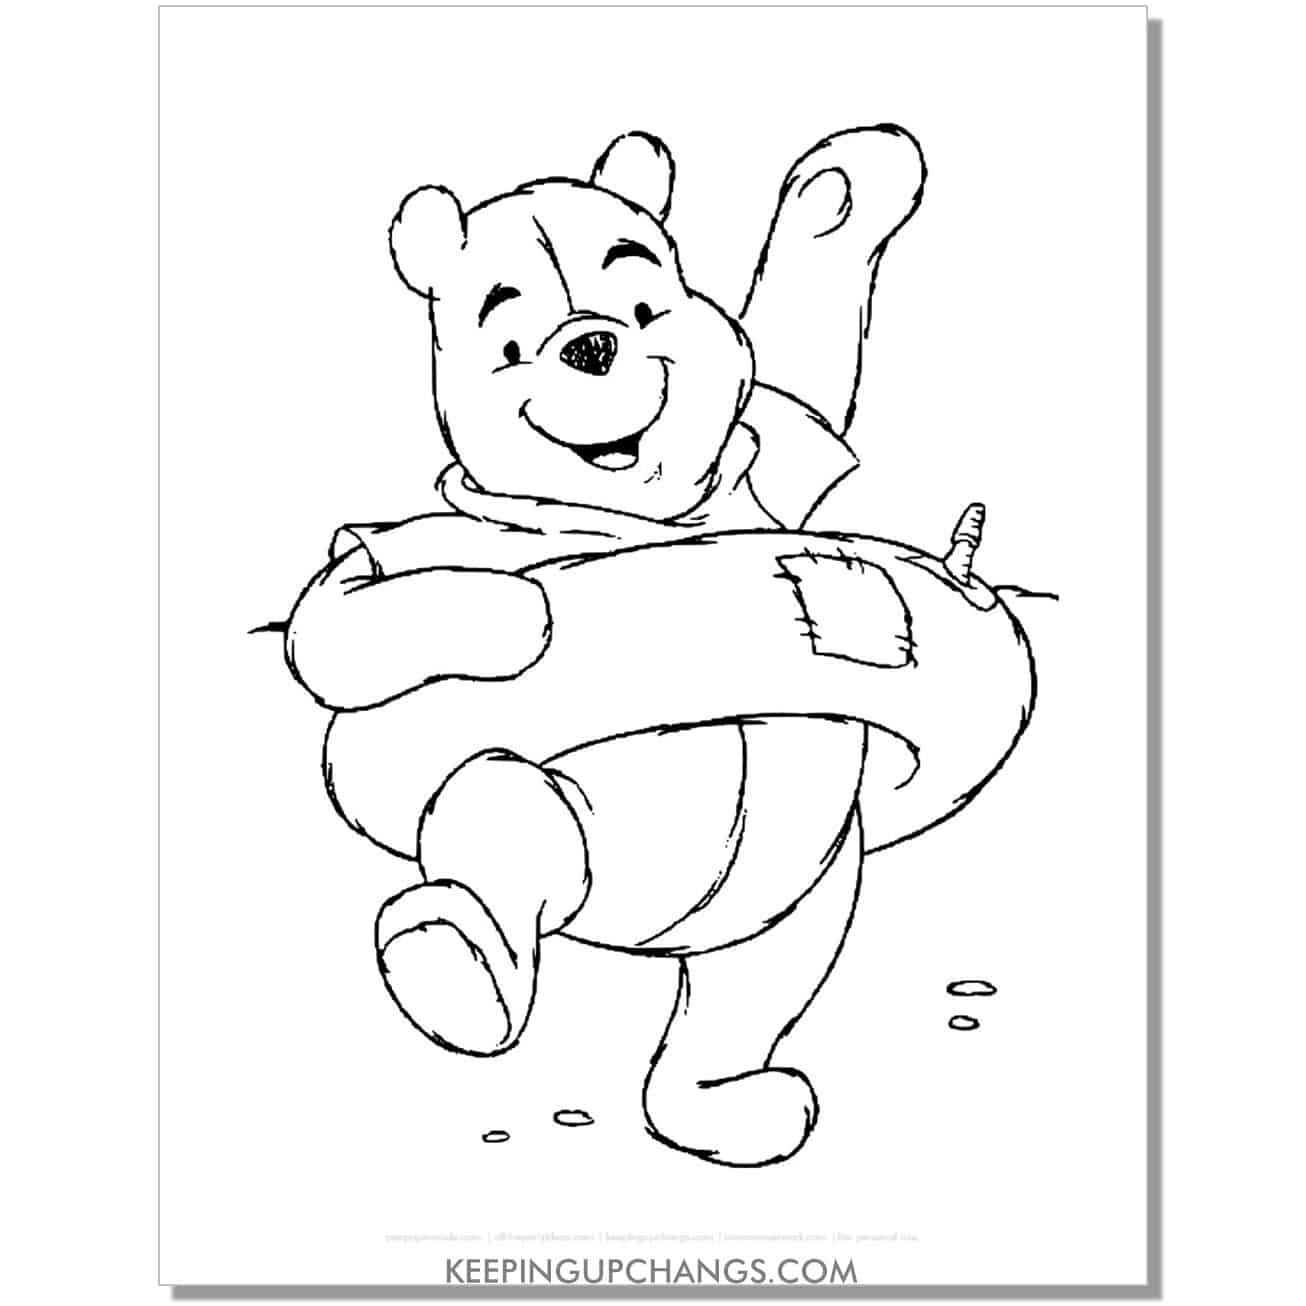 winnie the pooh with floatie around stomach coloring page, sheet.